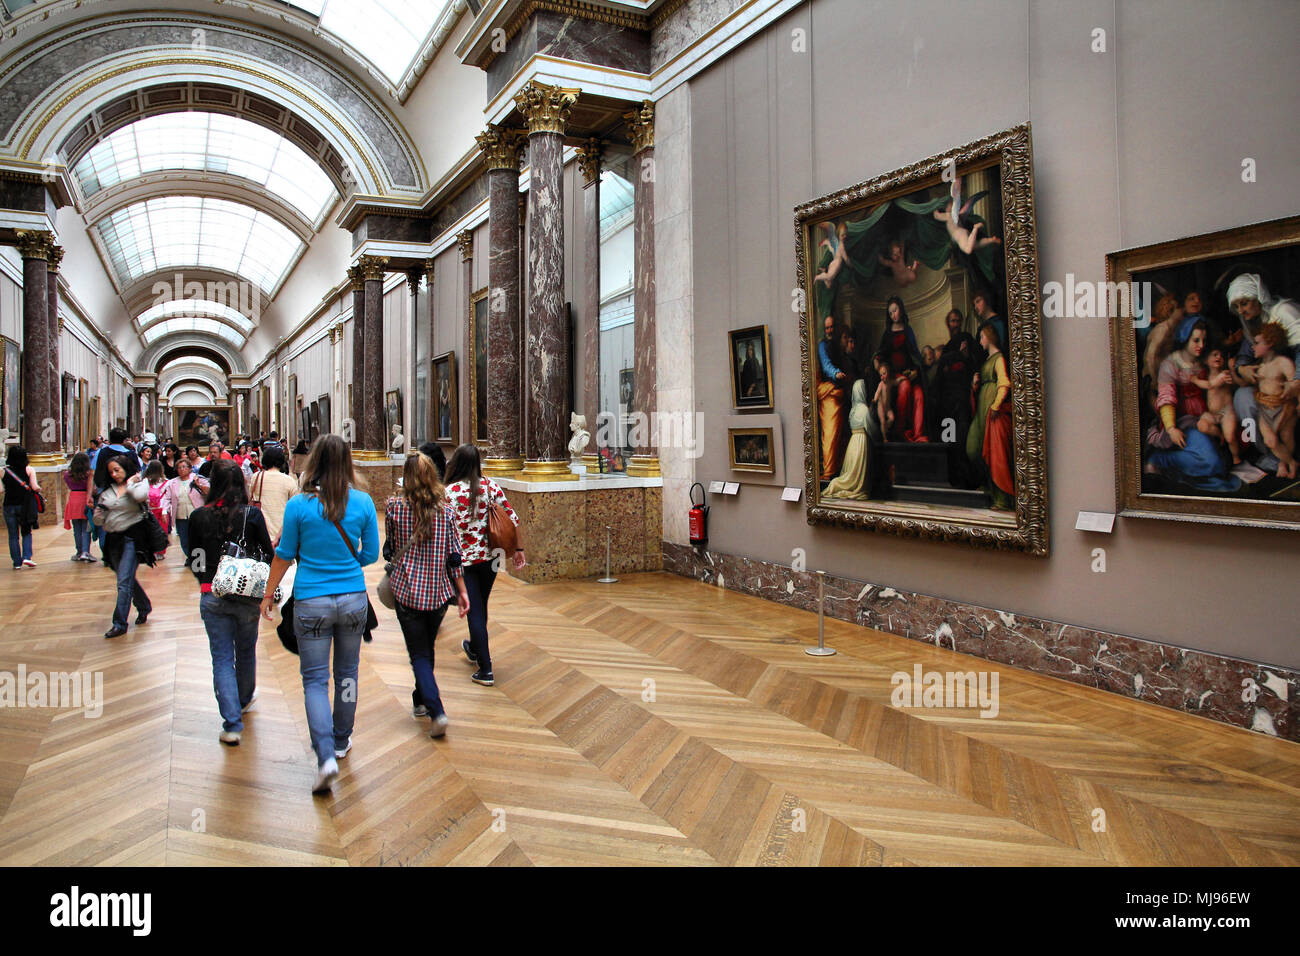 PARIS - JULY 22: Visitors admire paintings on July 22, 2011 in Louvre Museum, Paris, France. With 8.5m annual visitors, Louvre is consistently the mos Stock Photo